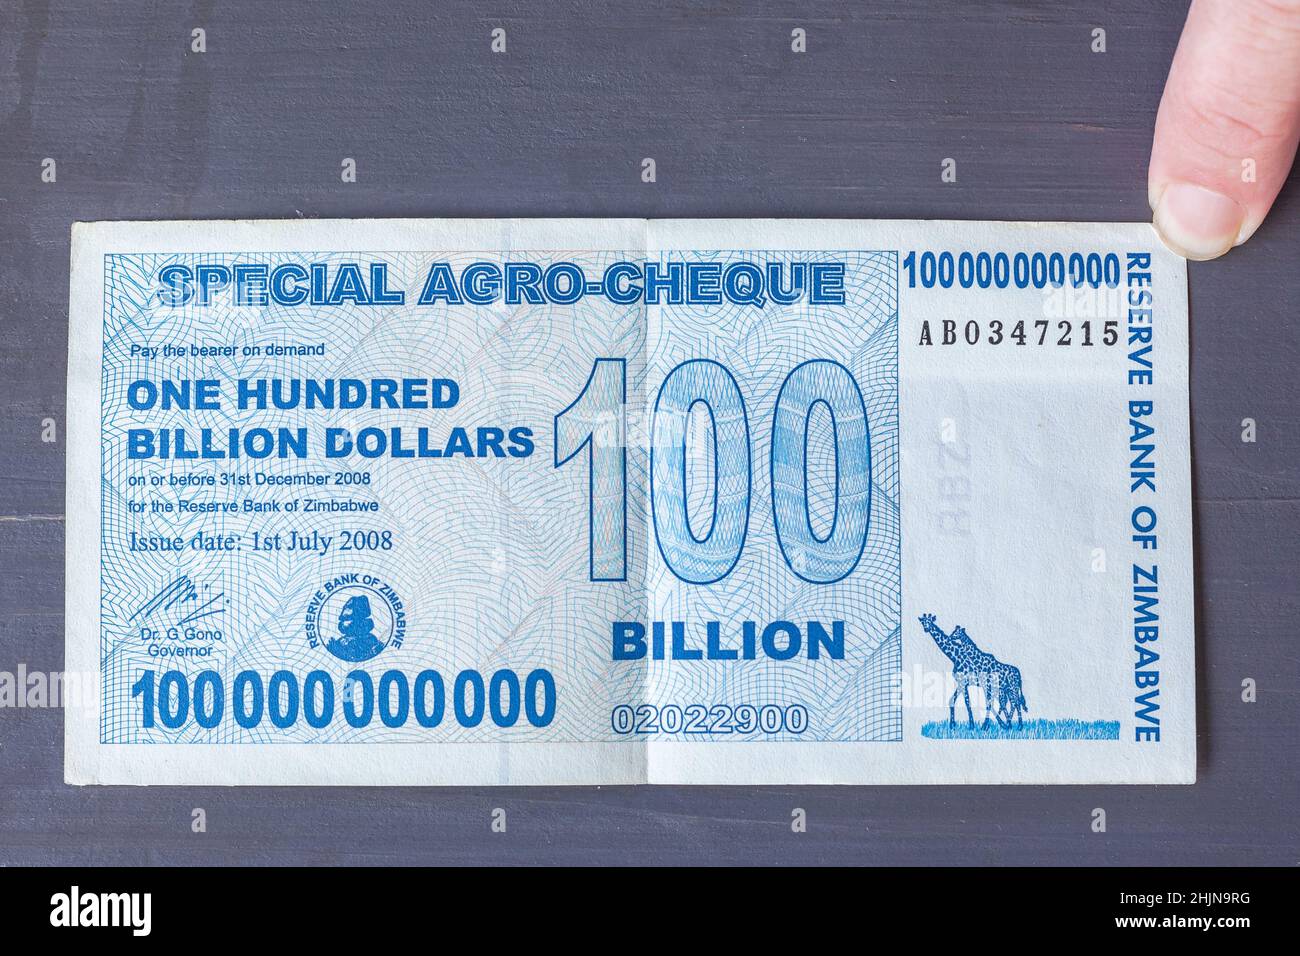 Zimbabwe currency money paper note of one hundred billion dollars close up photo of 2008 failed financial economic management for global record Stock Photo